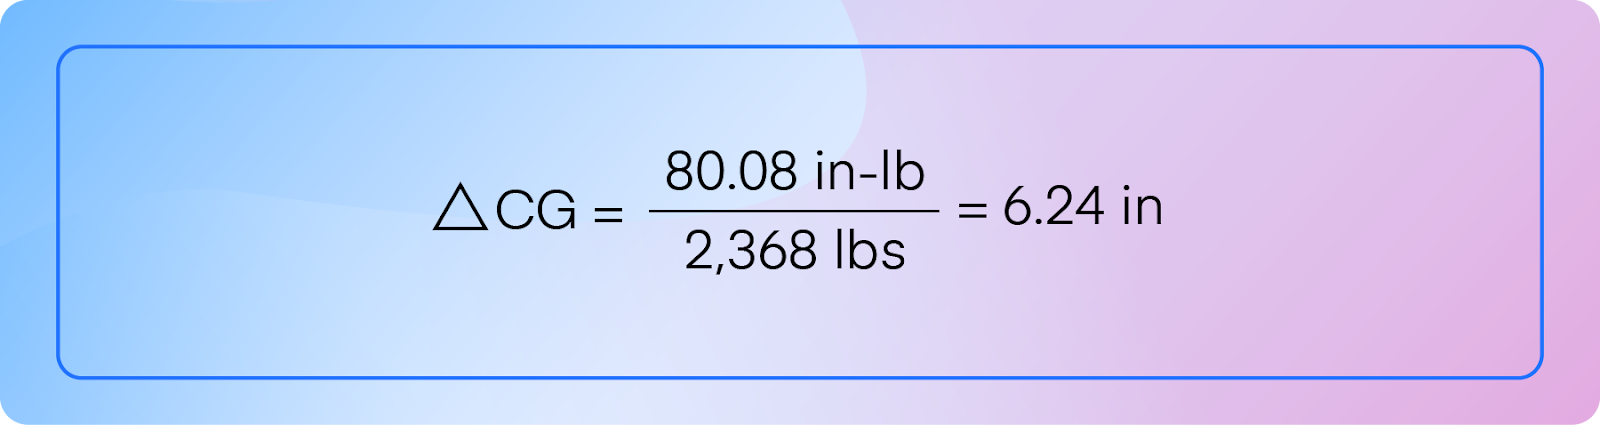 Calculating weight added formula, part 2.